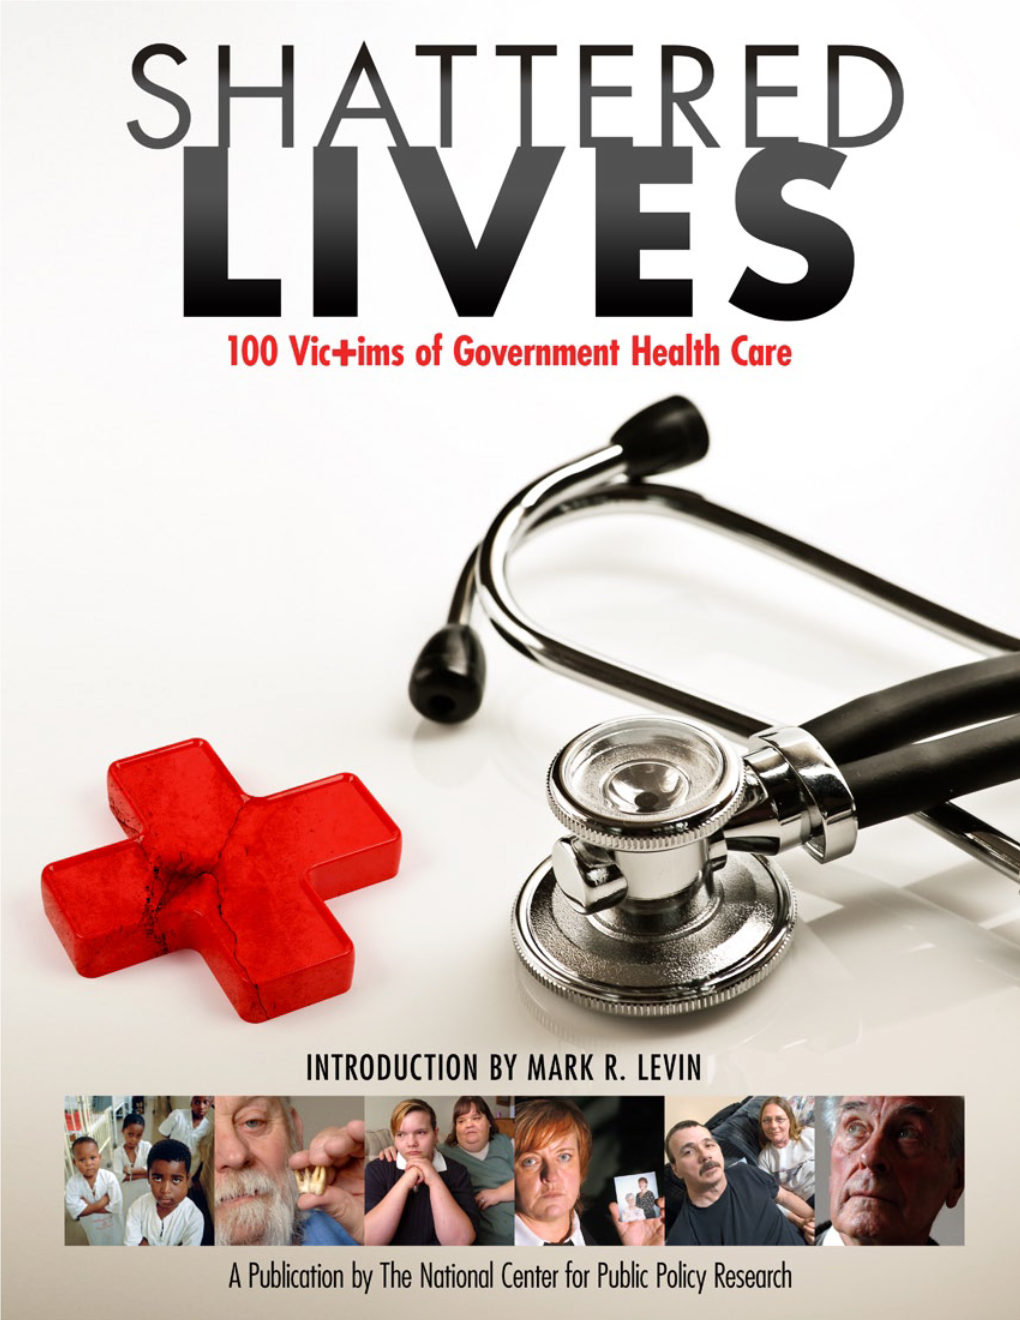 SHATTERED LIVES: 100 Victims of Government Health Care